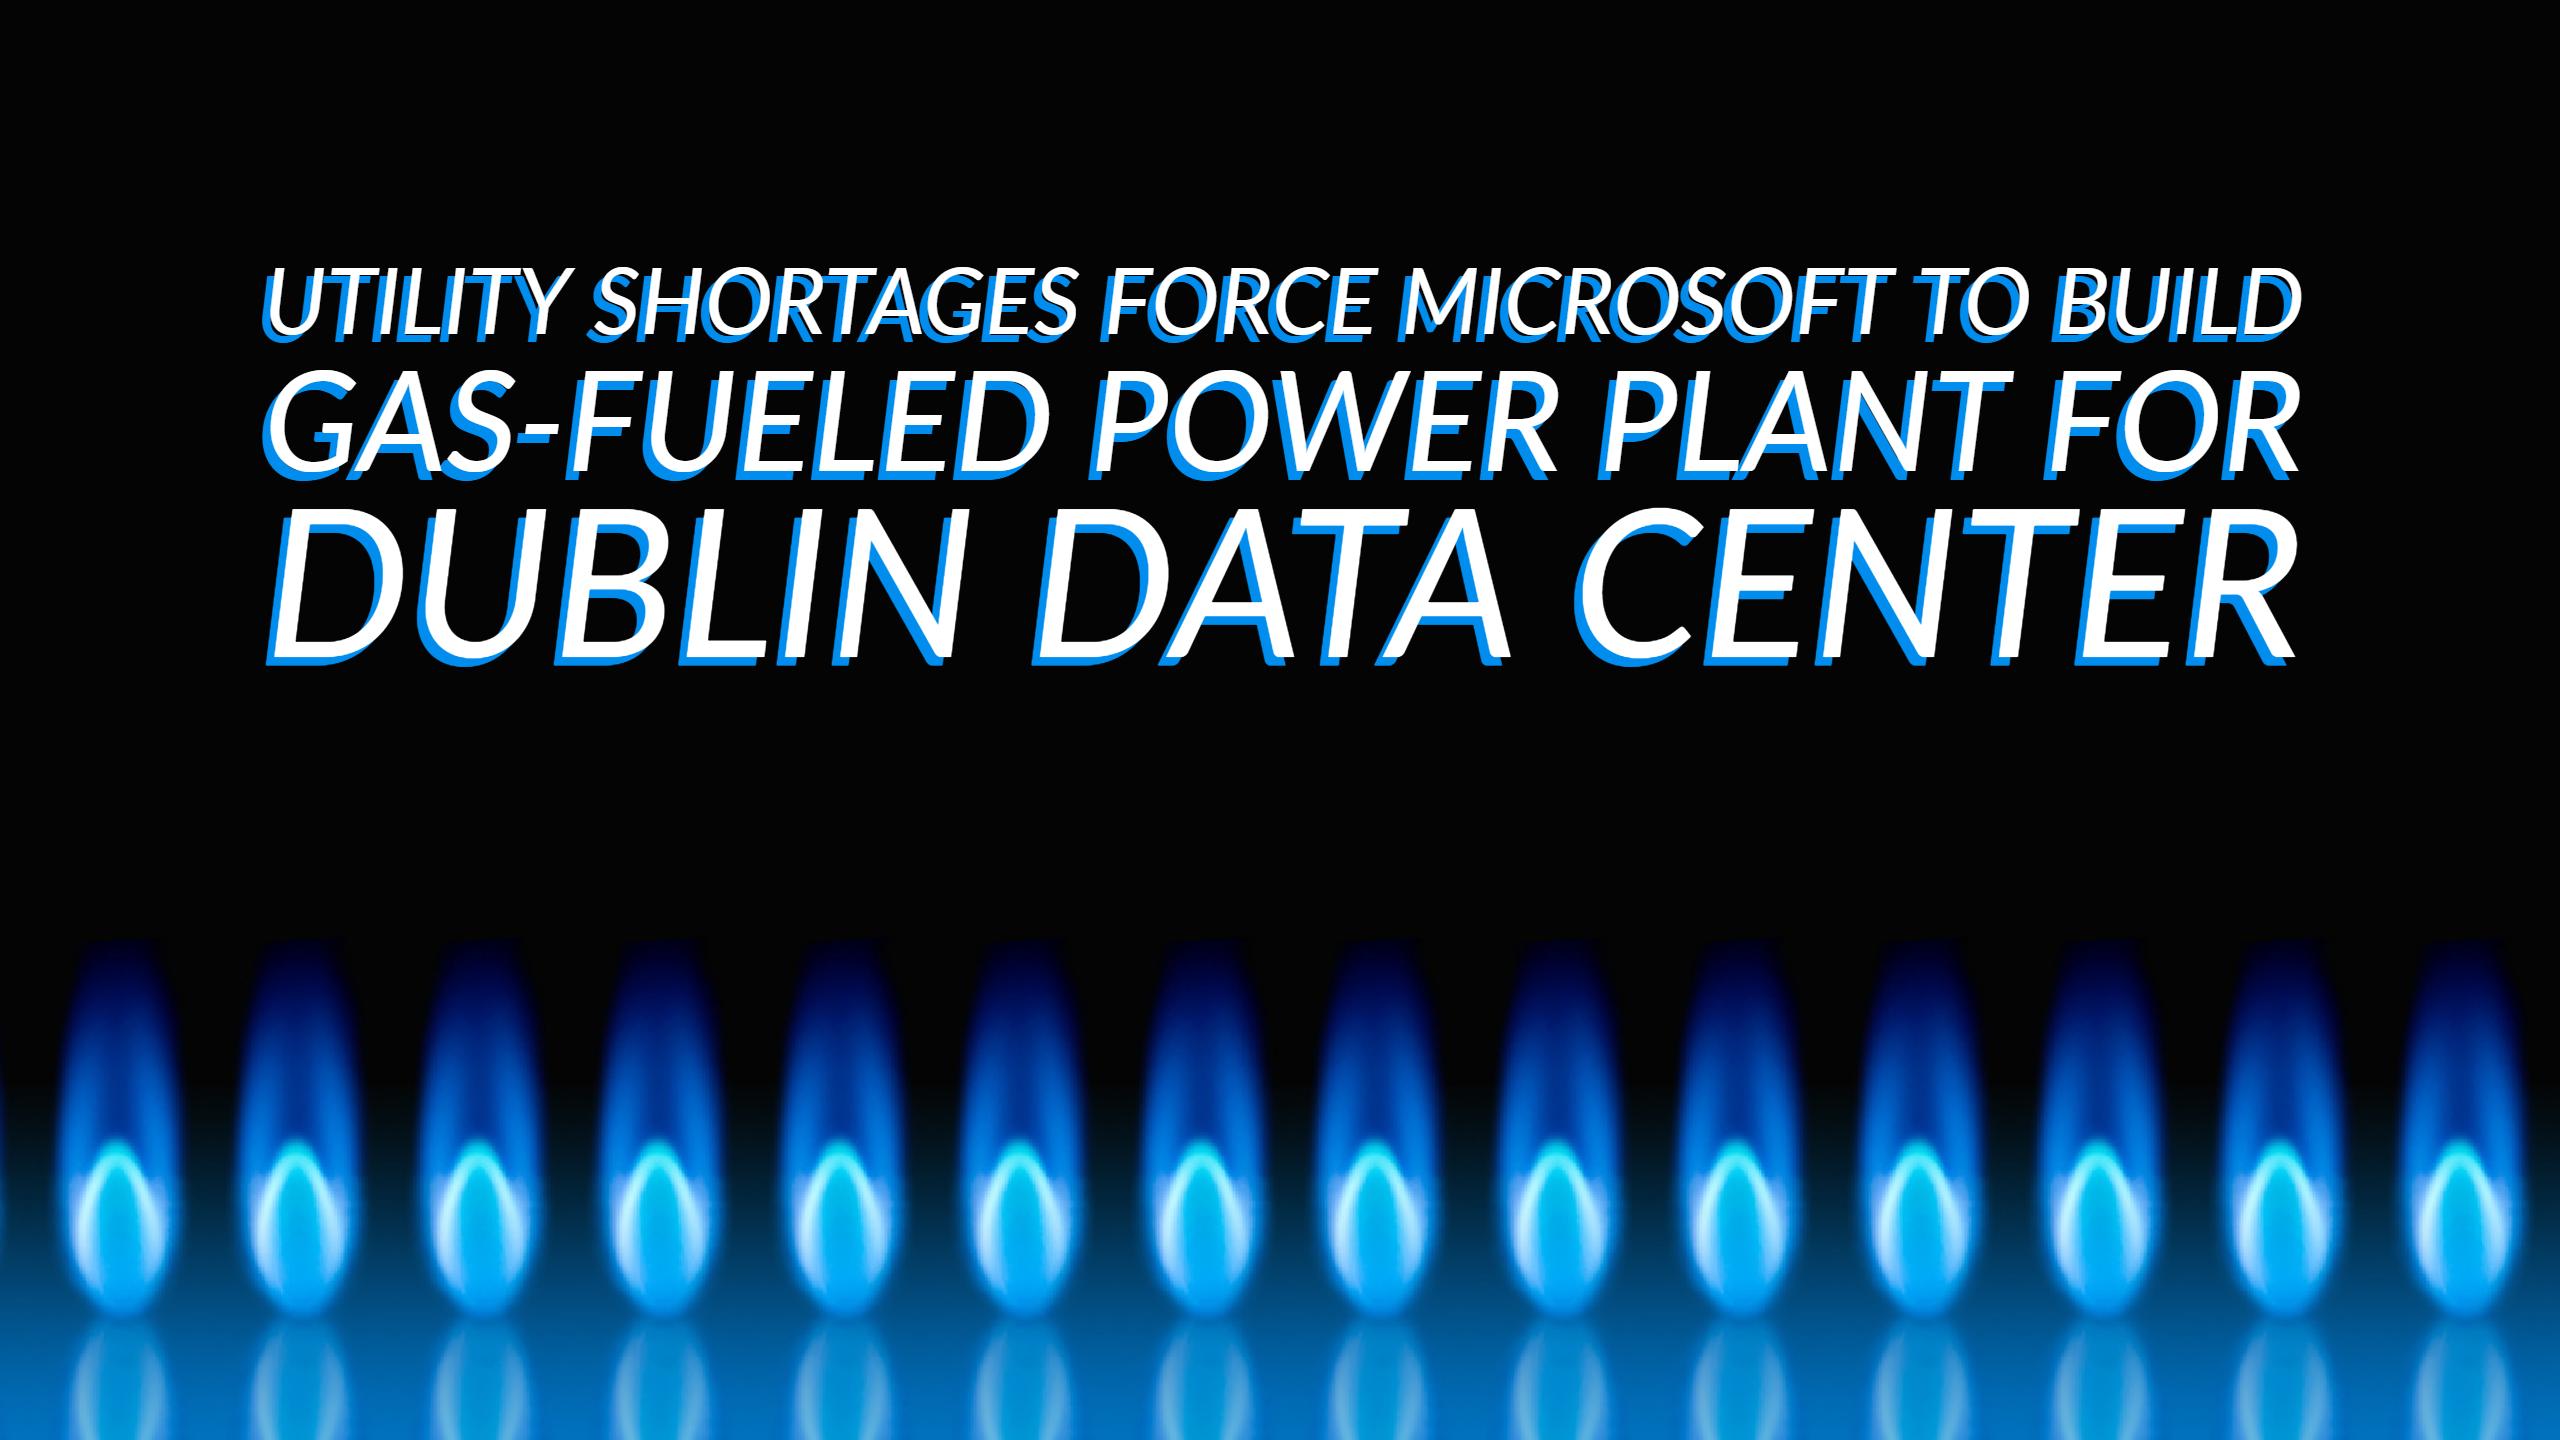 Utility Shortages Force Microsoft to Build Gas-Fueled Power Plant for Dublin Data Center